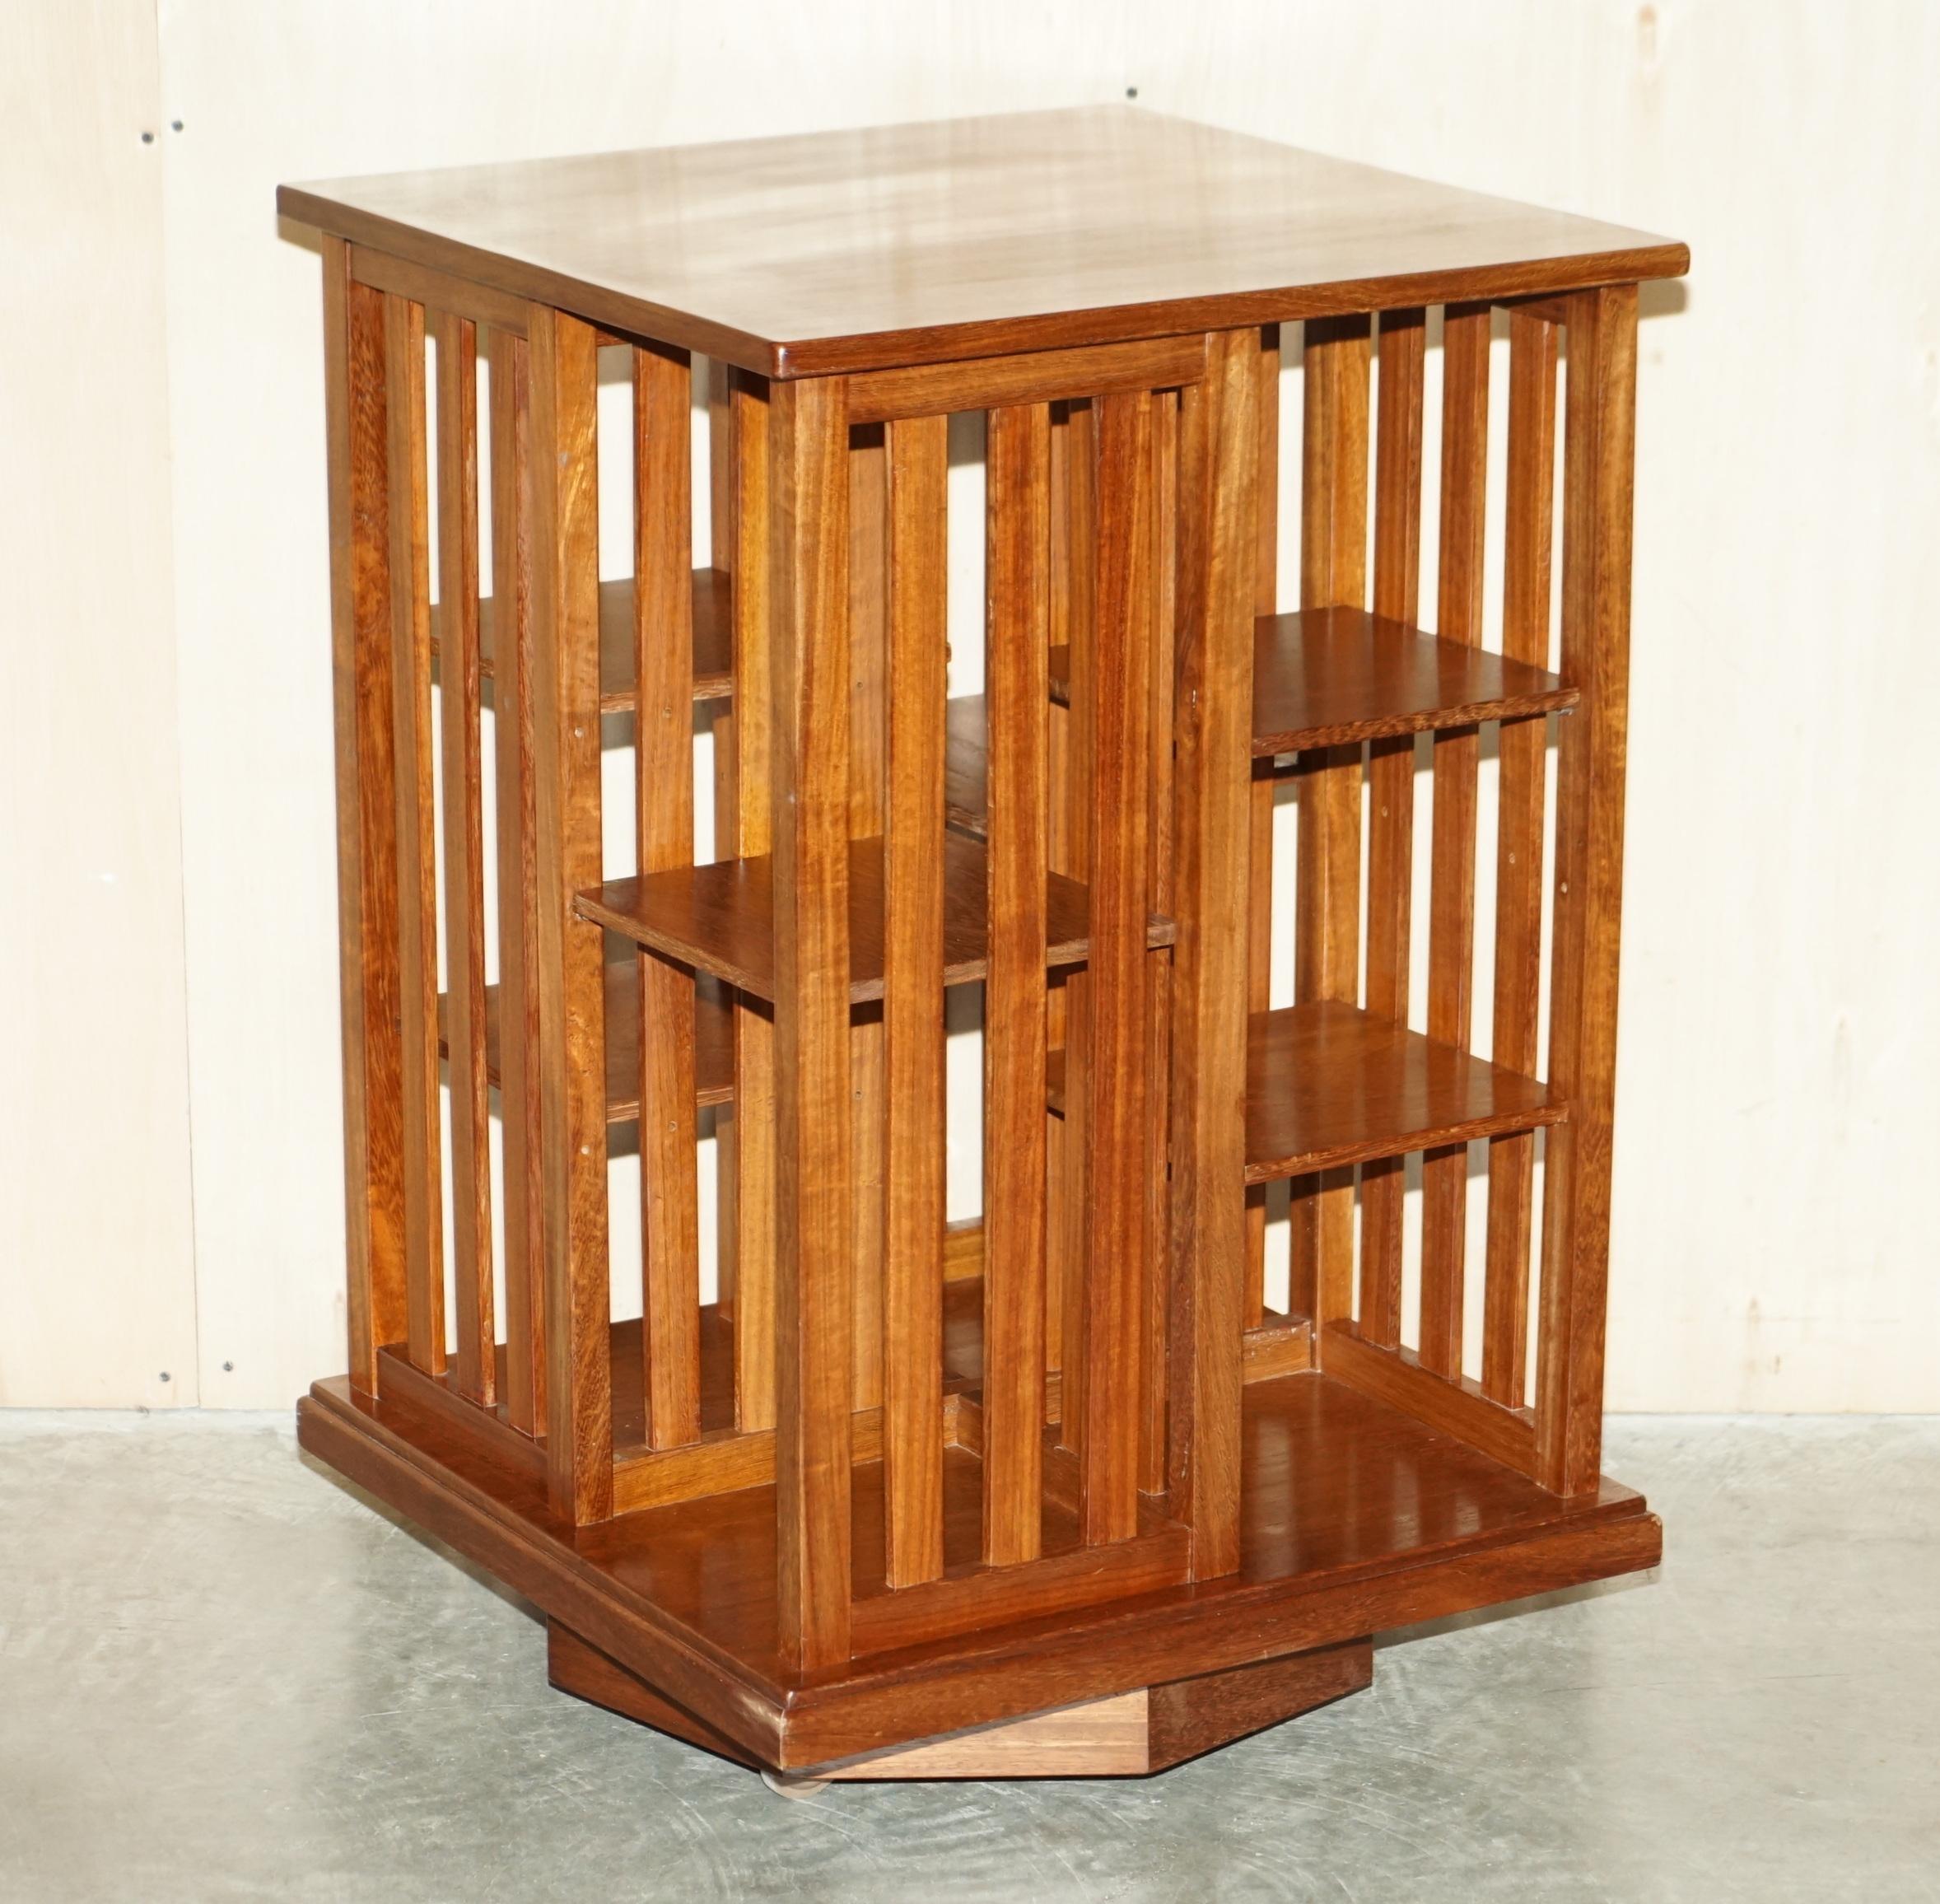 We are delighted to offer for sale this lovely English flamed mahogany circa 1920 Art Deco revolving bookcase table

A good looking and well made piece, the timber cuts are exquisite, they look to be Honduras mahogany which is super fine, you find